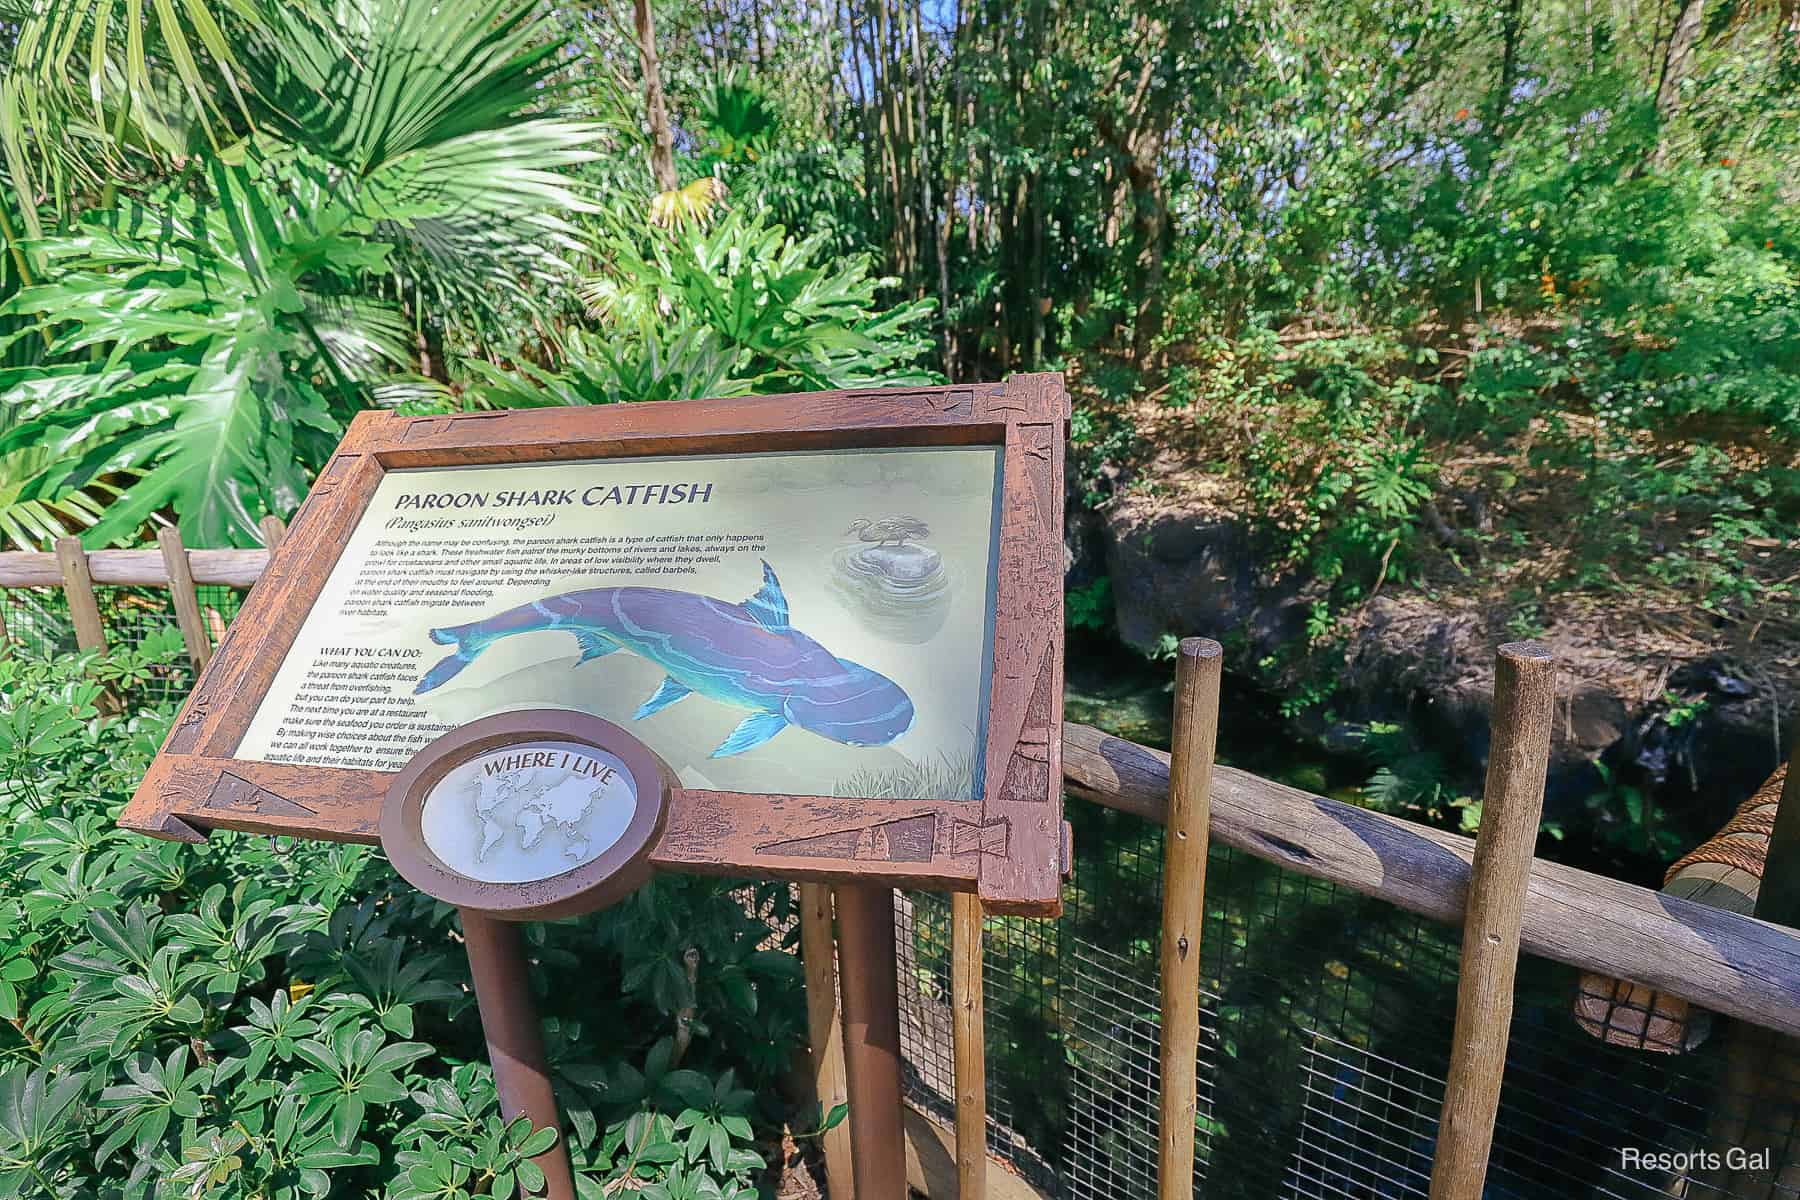 a sign that shows where you might see a Paroon Shark Catfish on the Tree of Life Trail 